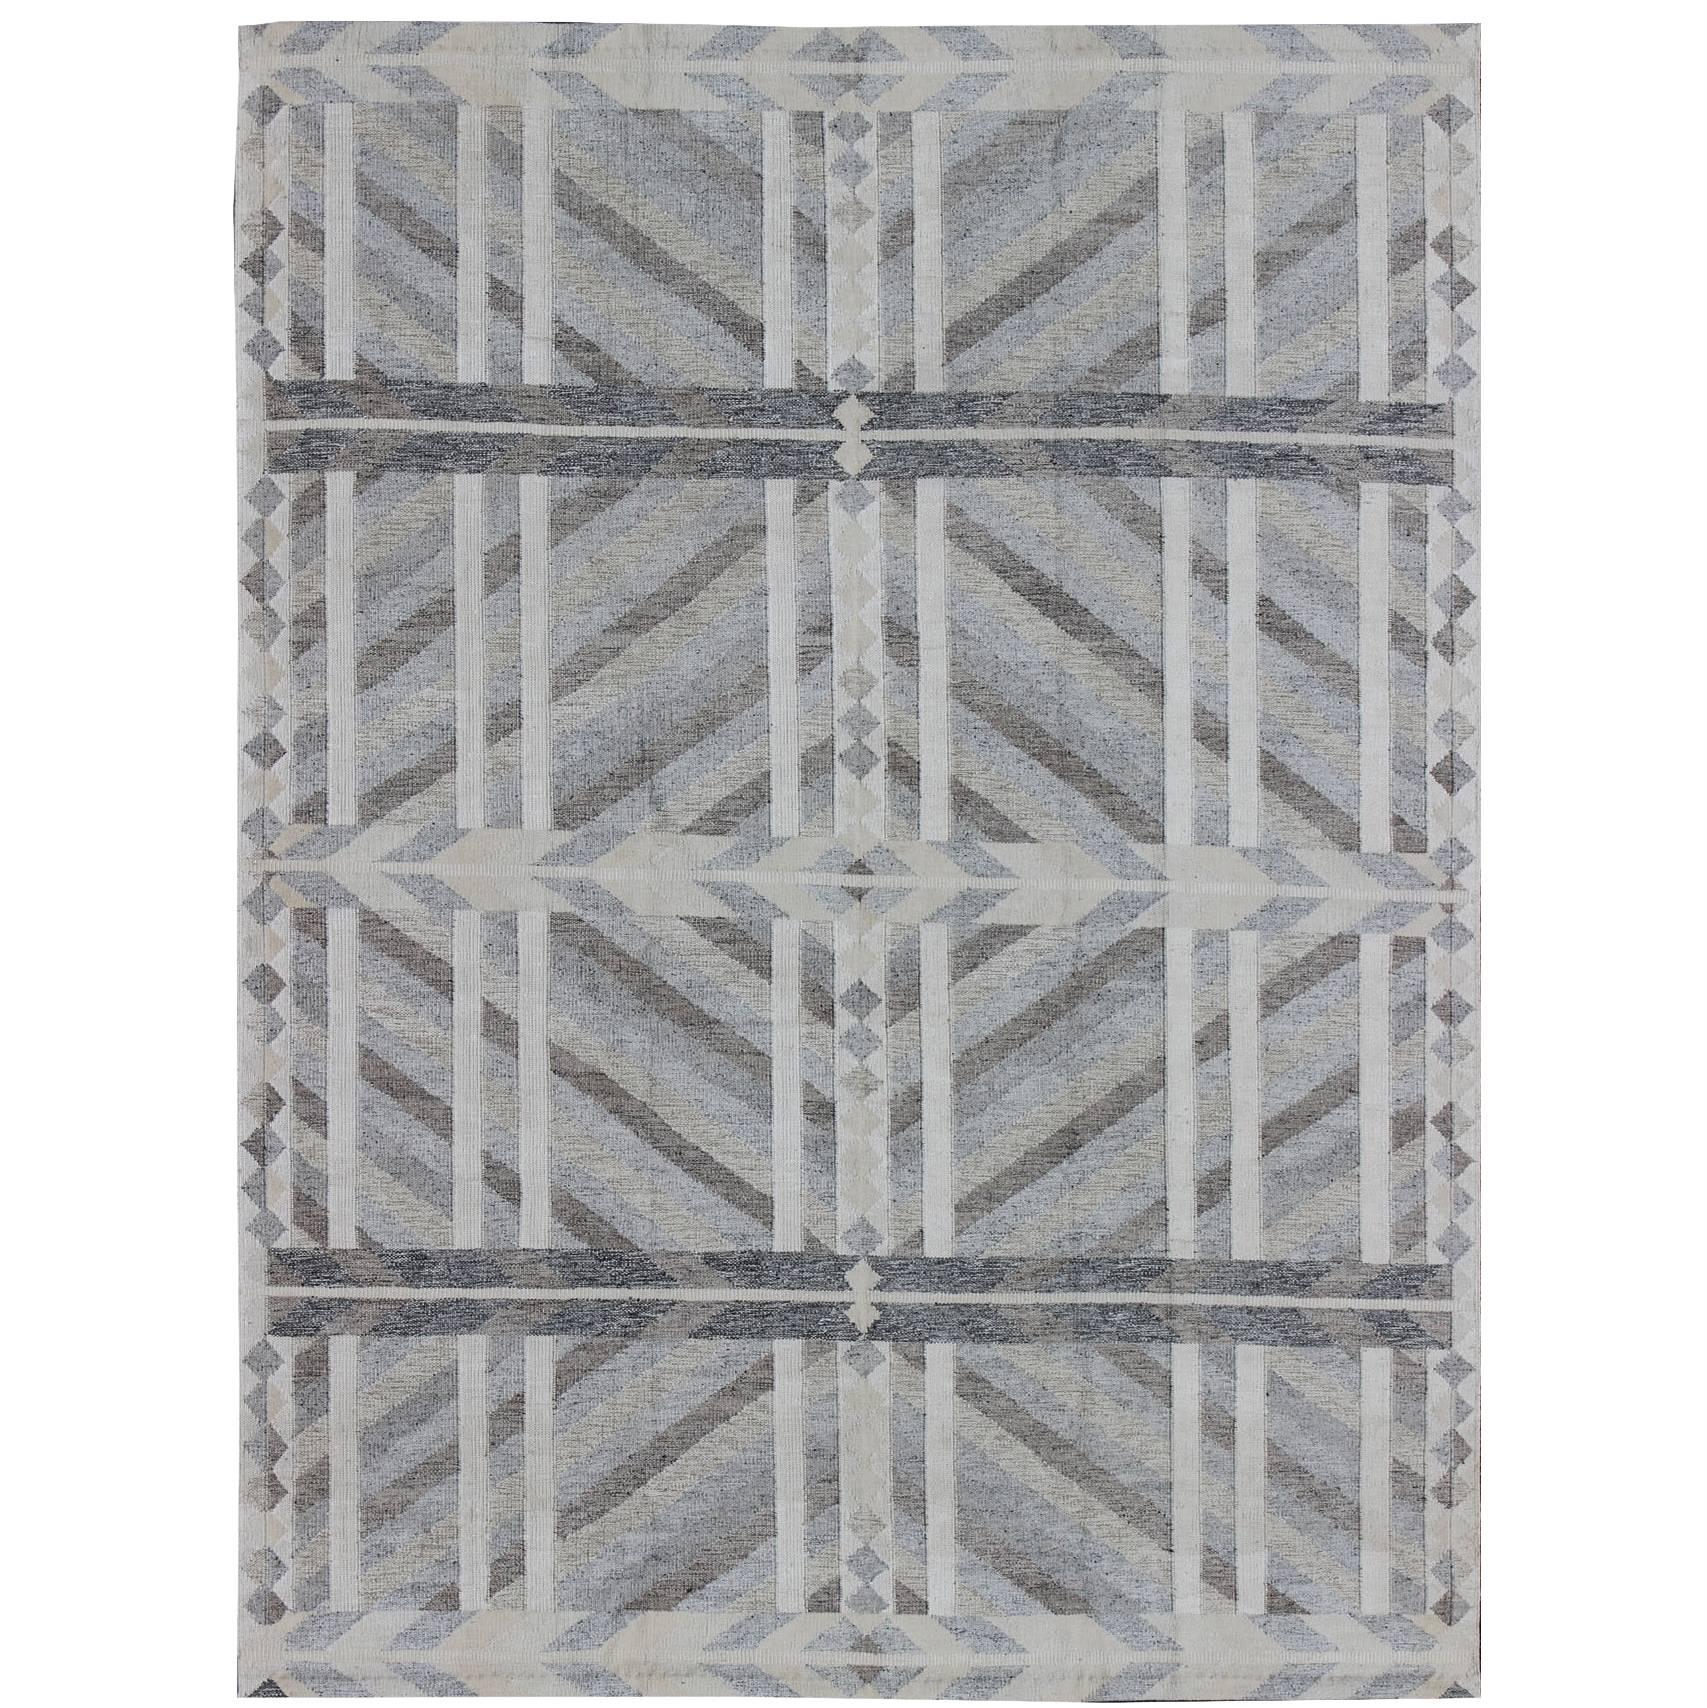 Large Modern Scandinavian/Swedish Geometric Rug in Gray and Pastel Colors For Sale